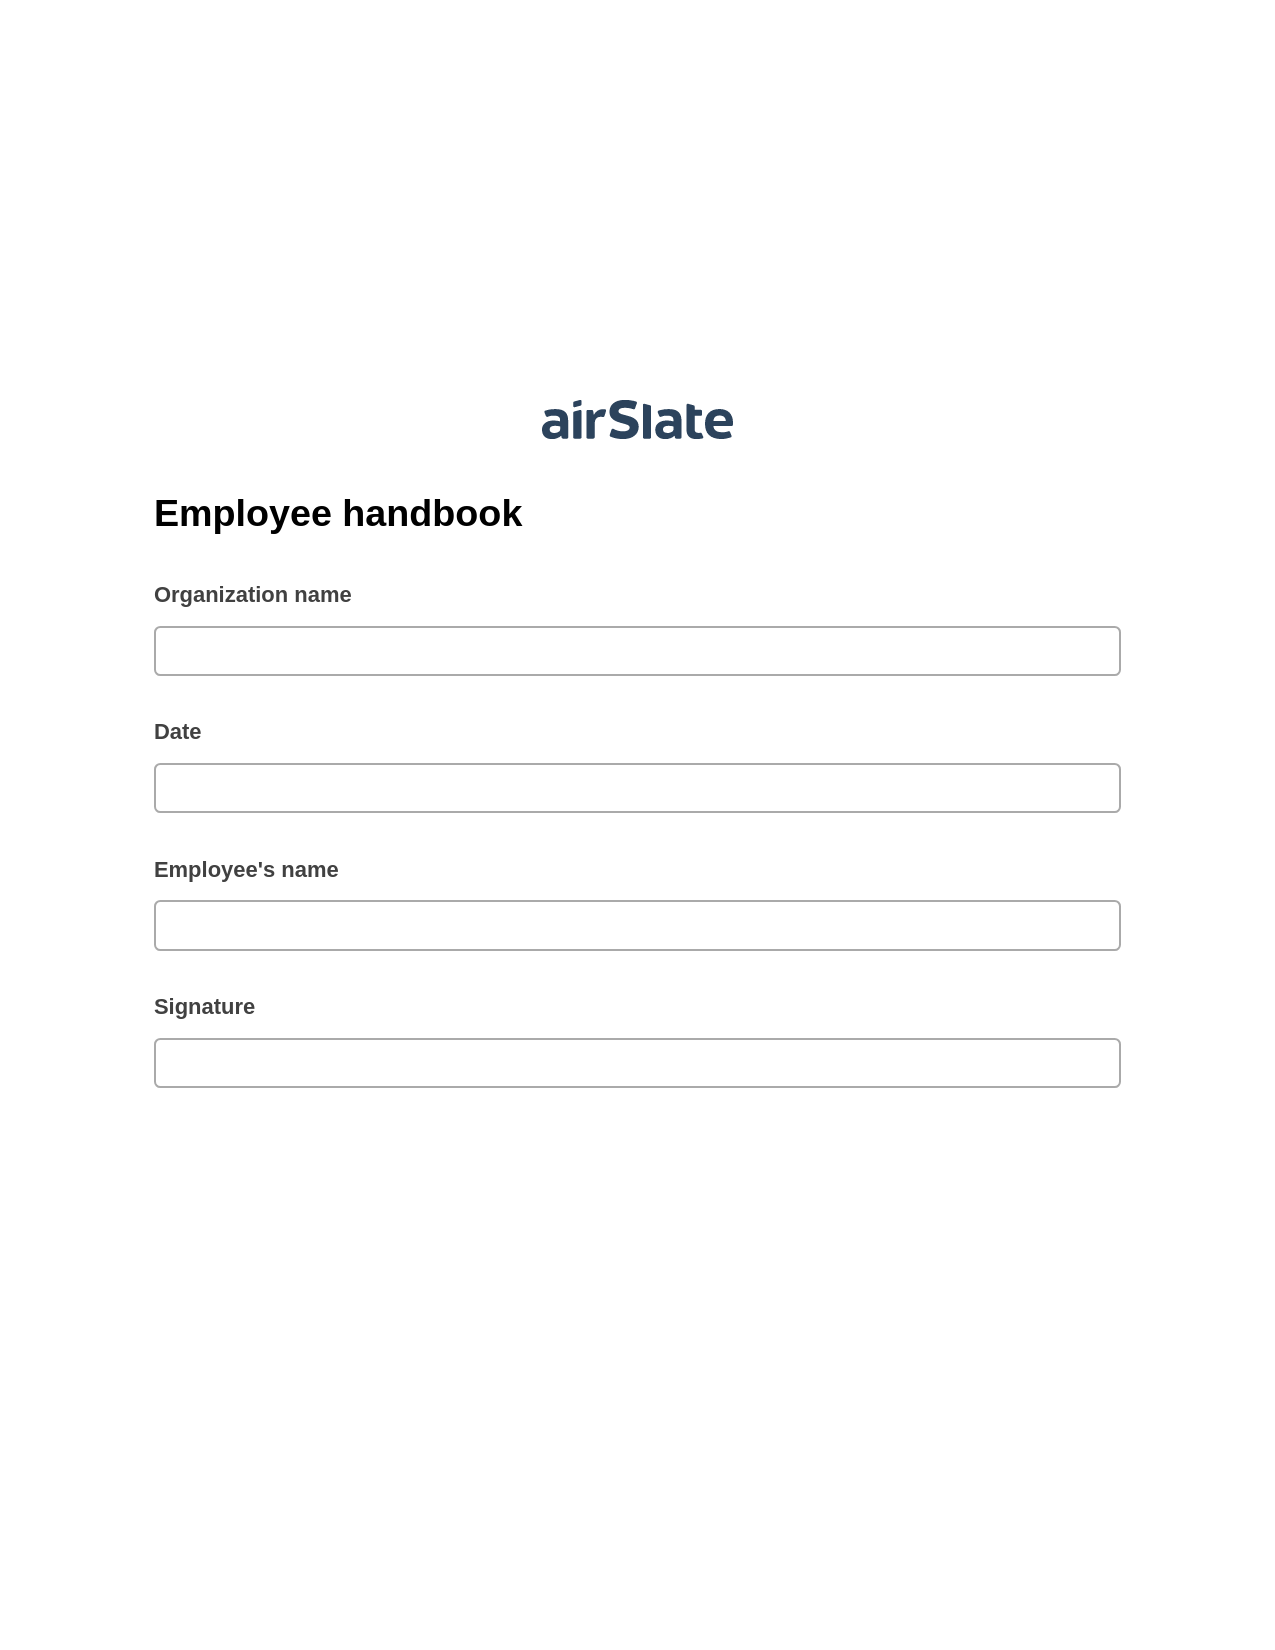 Employee handbook Pre-fill Dropdowns from Office 365 Excel Bot, Set Signature Type Bot, Export to Excel 365 Bot